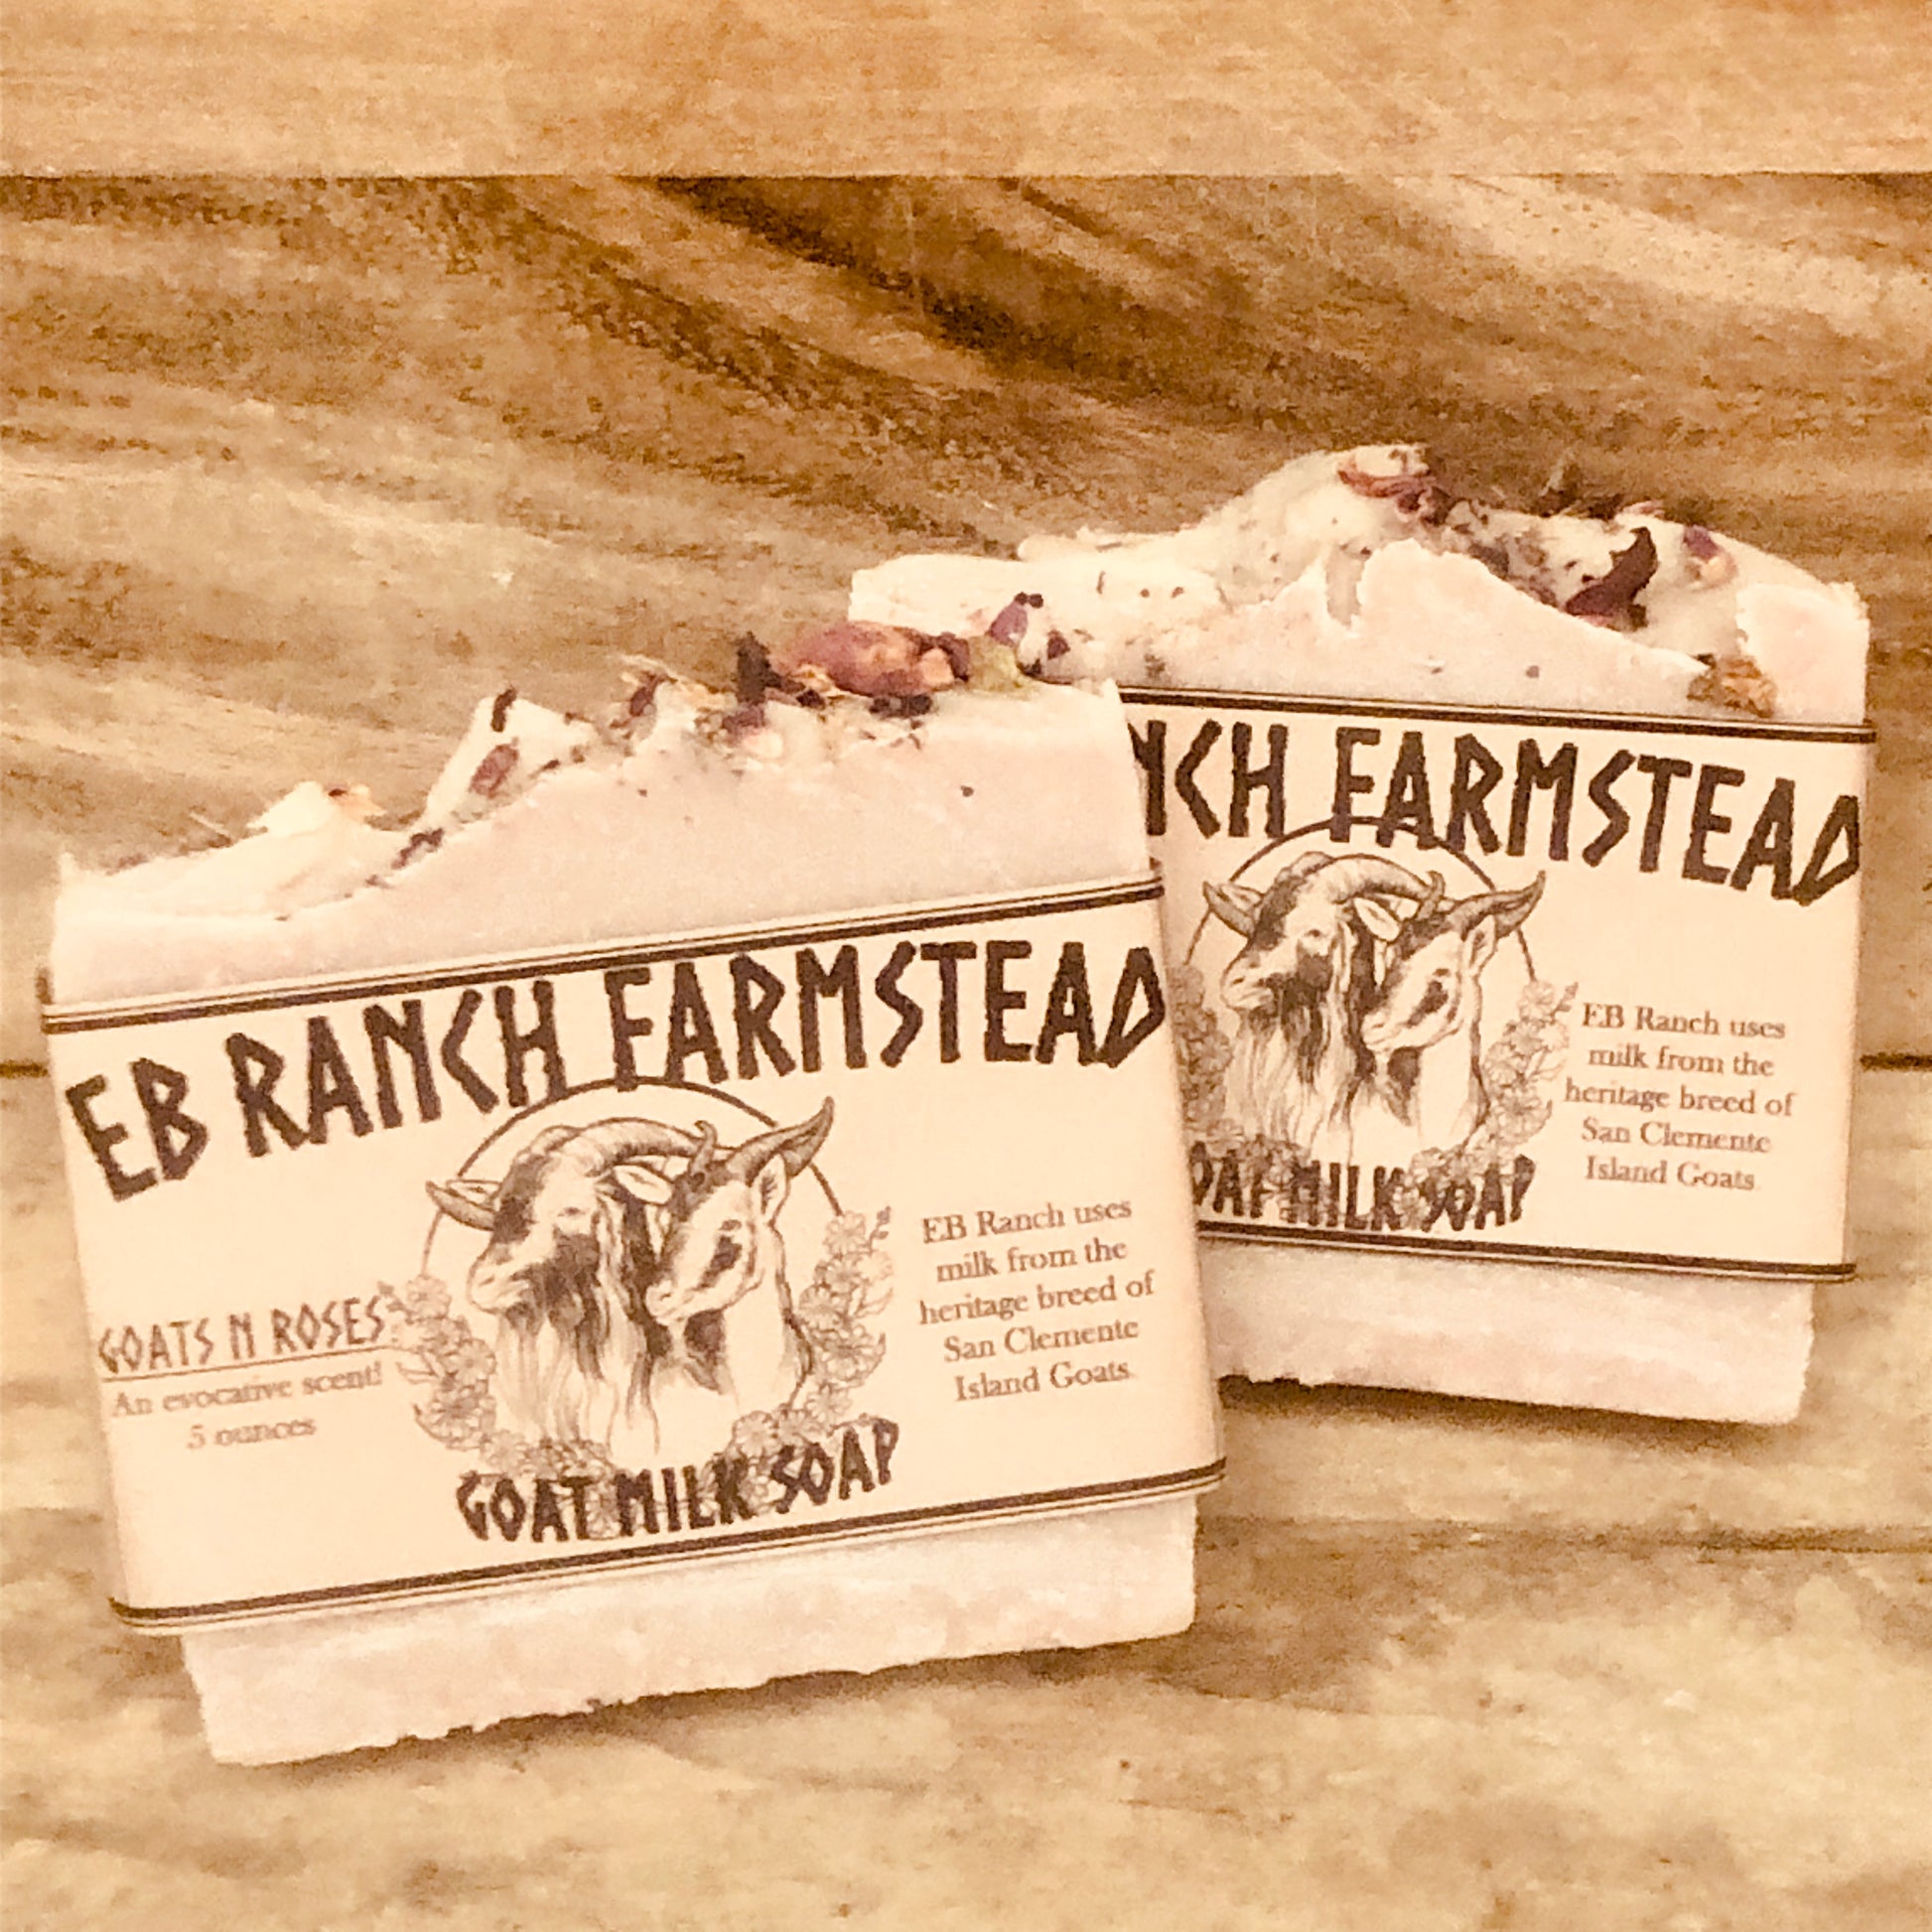 all natural goat milk soap, natural soap, rose soap, rose goat milk soap, simple soap, farmstead soap, handcrafted soap, artisan soap, real soap, homemade soap, 